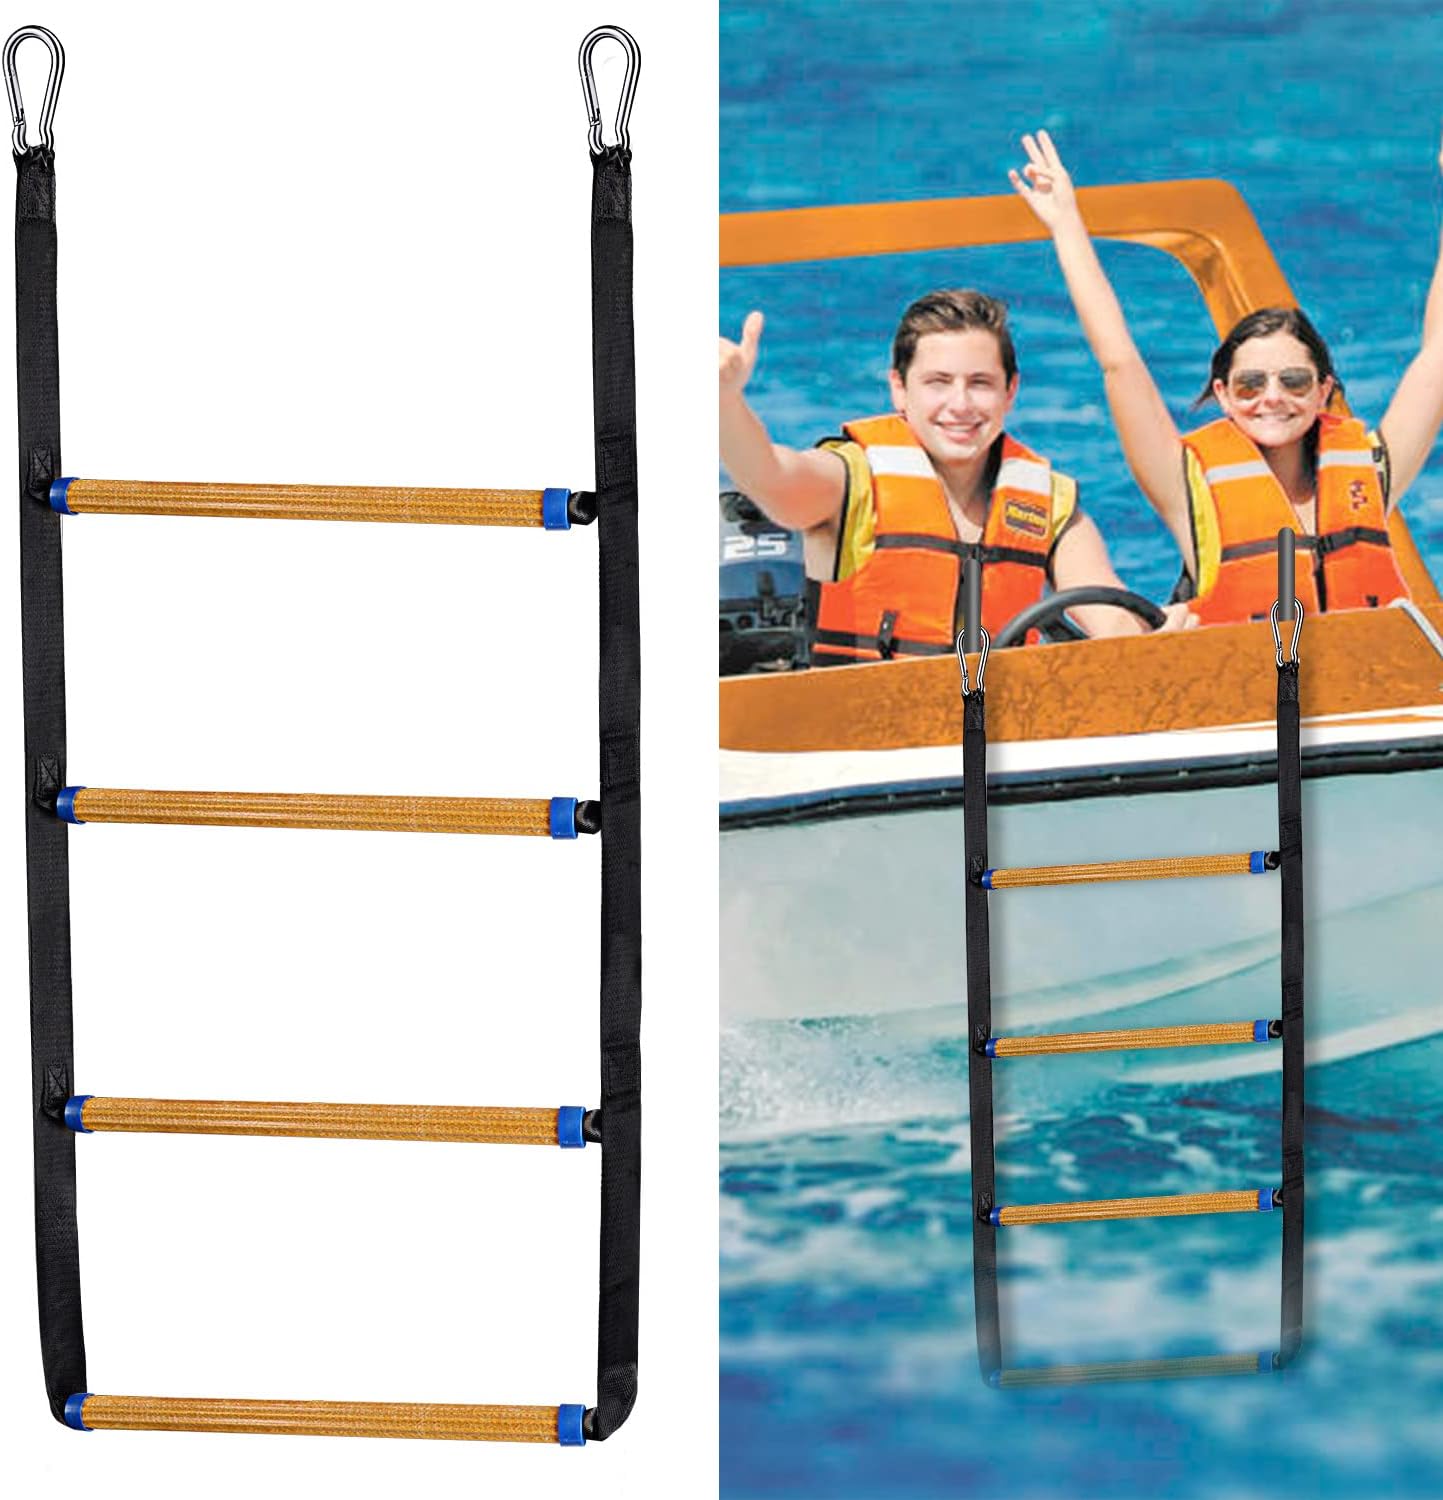 Boat Rope Ladder 4 Step,Rope Ladder Portable for Adults Fishing Boat Canoeing,Inflatable Boat, Kayak, Motorboat, Reusable Heavy Duty Anti Slip Rope Ladder - Boat Rope Ladder 4 Step Review